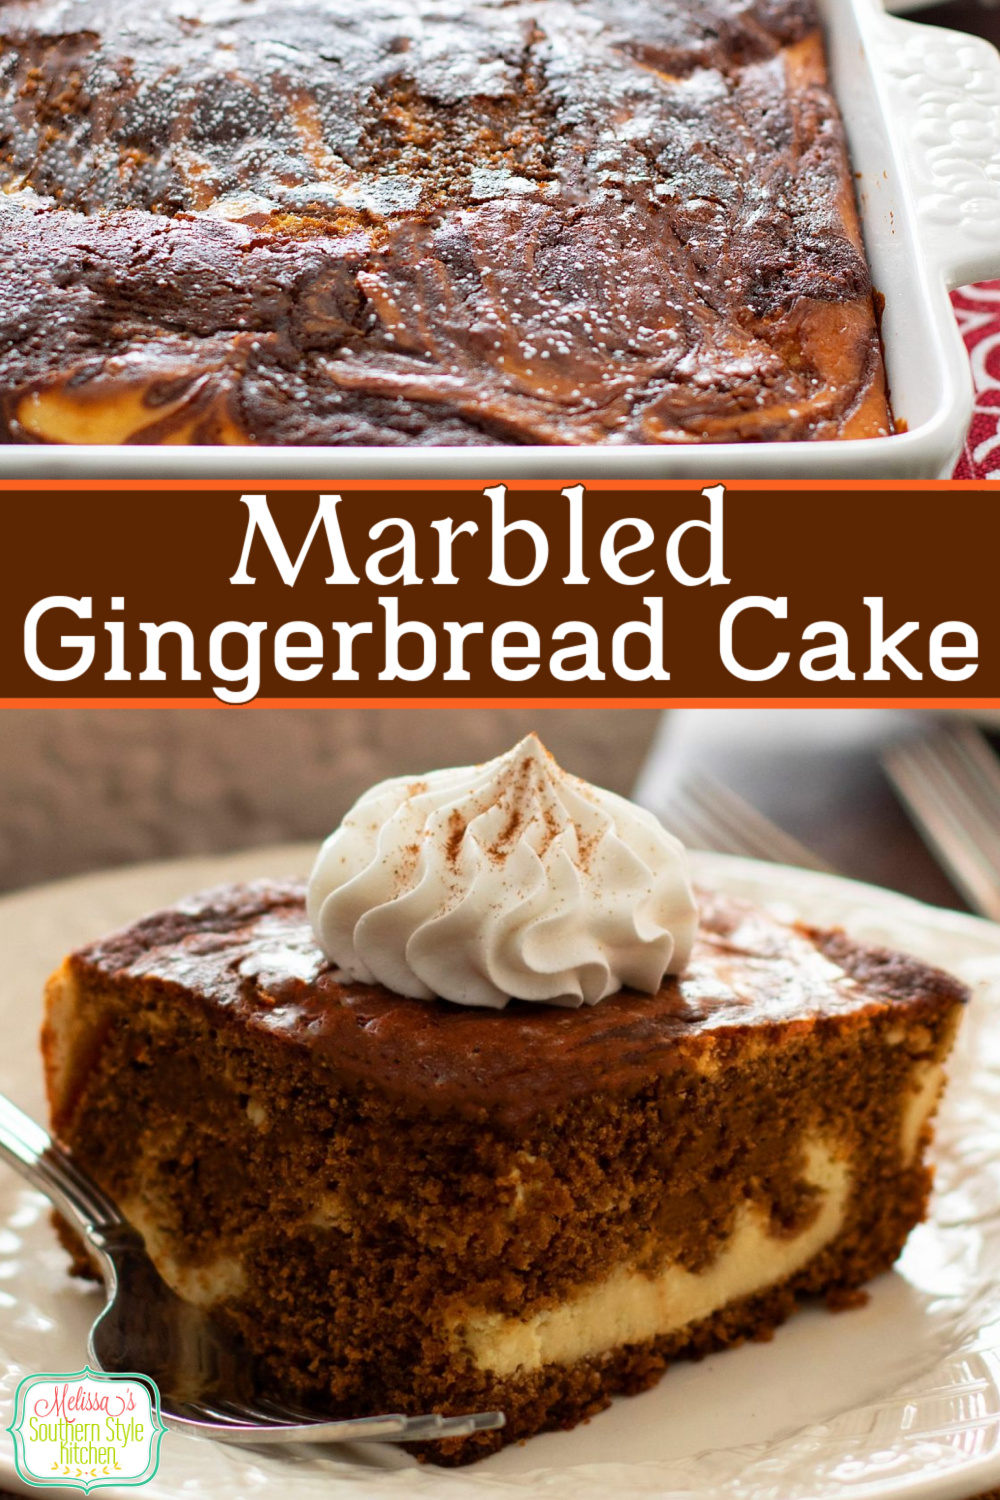 This Marbled Gingerbread Cake features a cheesecake-like swirl gives it a little something extra special to enjoy #gingerbread #gingerbreadcake #cakes #christmascakes #cakerecipes #gingerbreadrecipes #desserts #dessertfoodrecipes #southernfood #southernrecipes #holidaybaking via @melissasssk